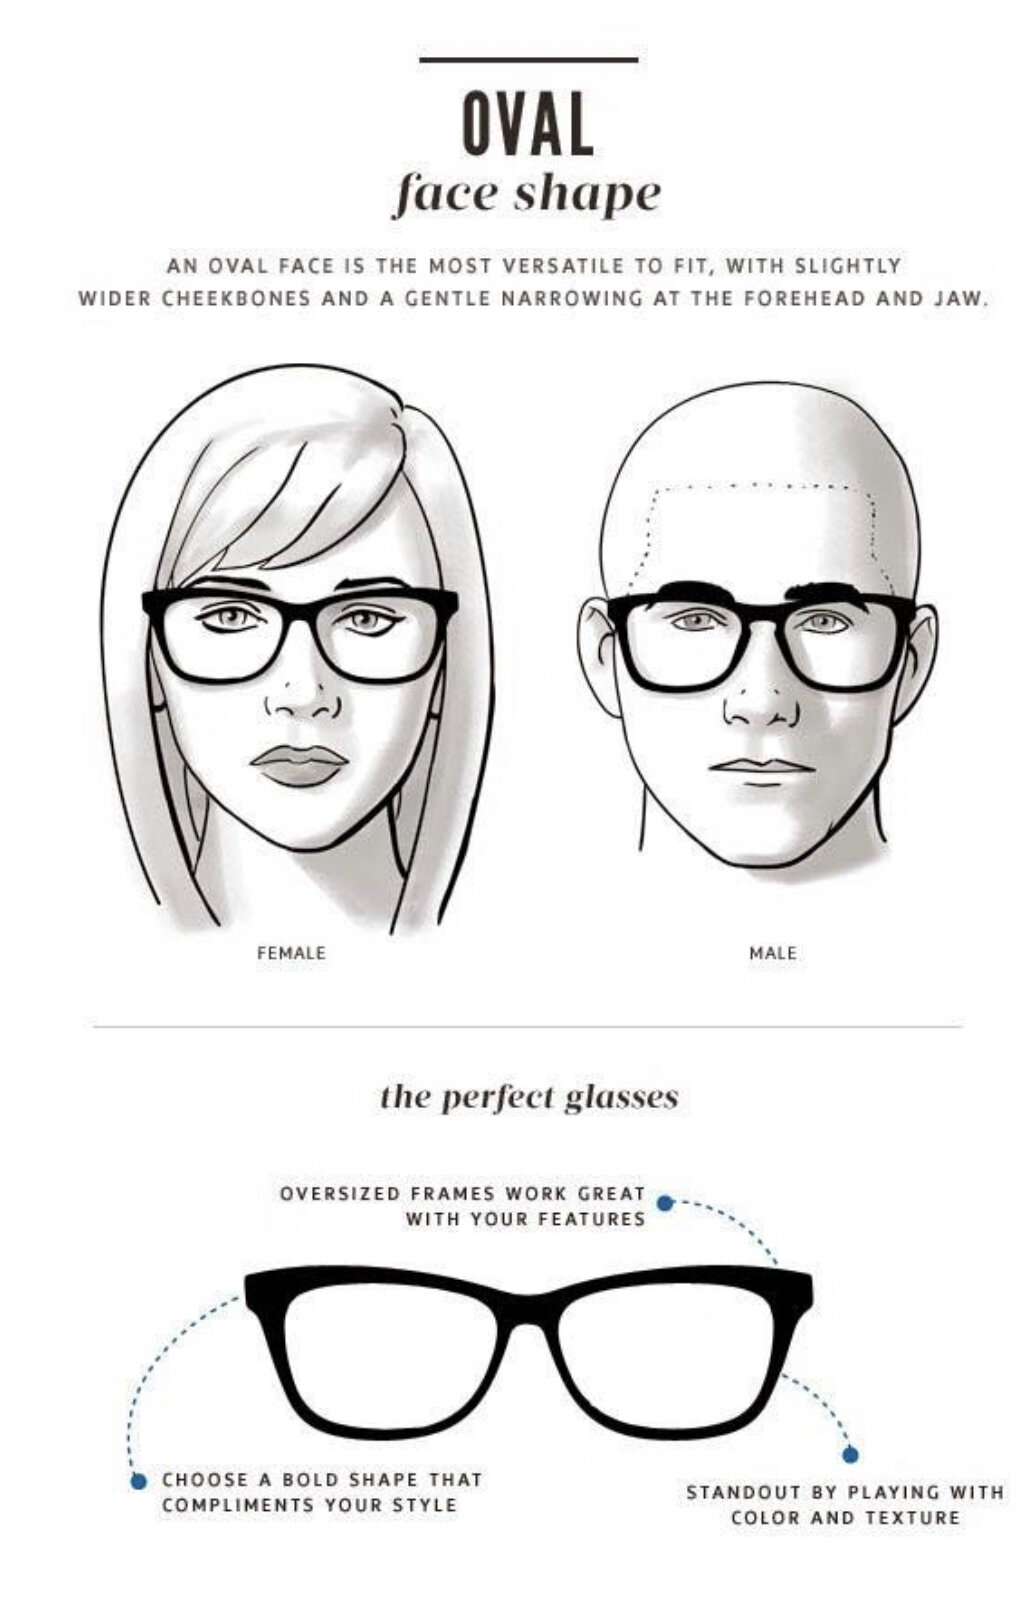 Find The Perfect Pair Of Glasses For Your Face Shape — The Optical Shop